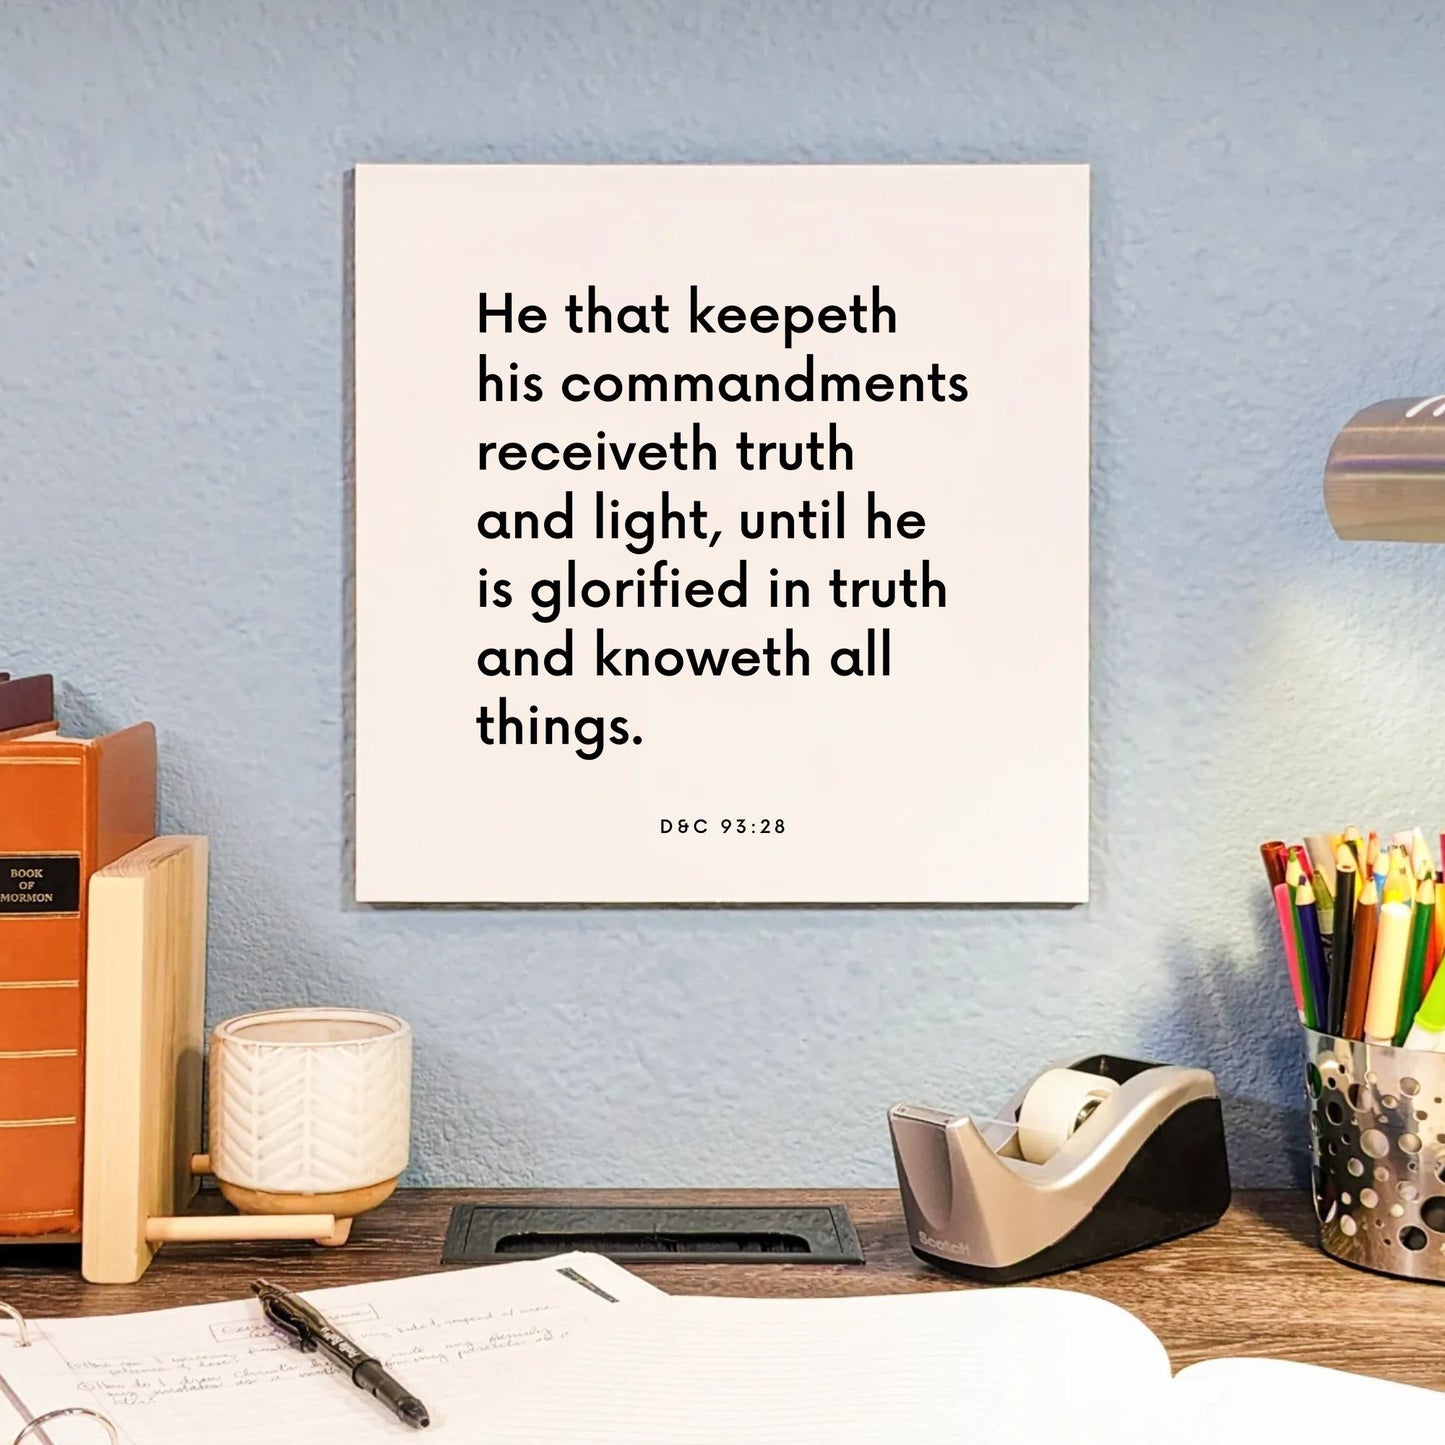 Desk mouting of the scripture tile for D&C 93:28 - "He that keepeth his commandments receiveth truth and light"